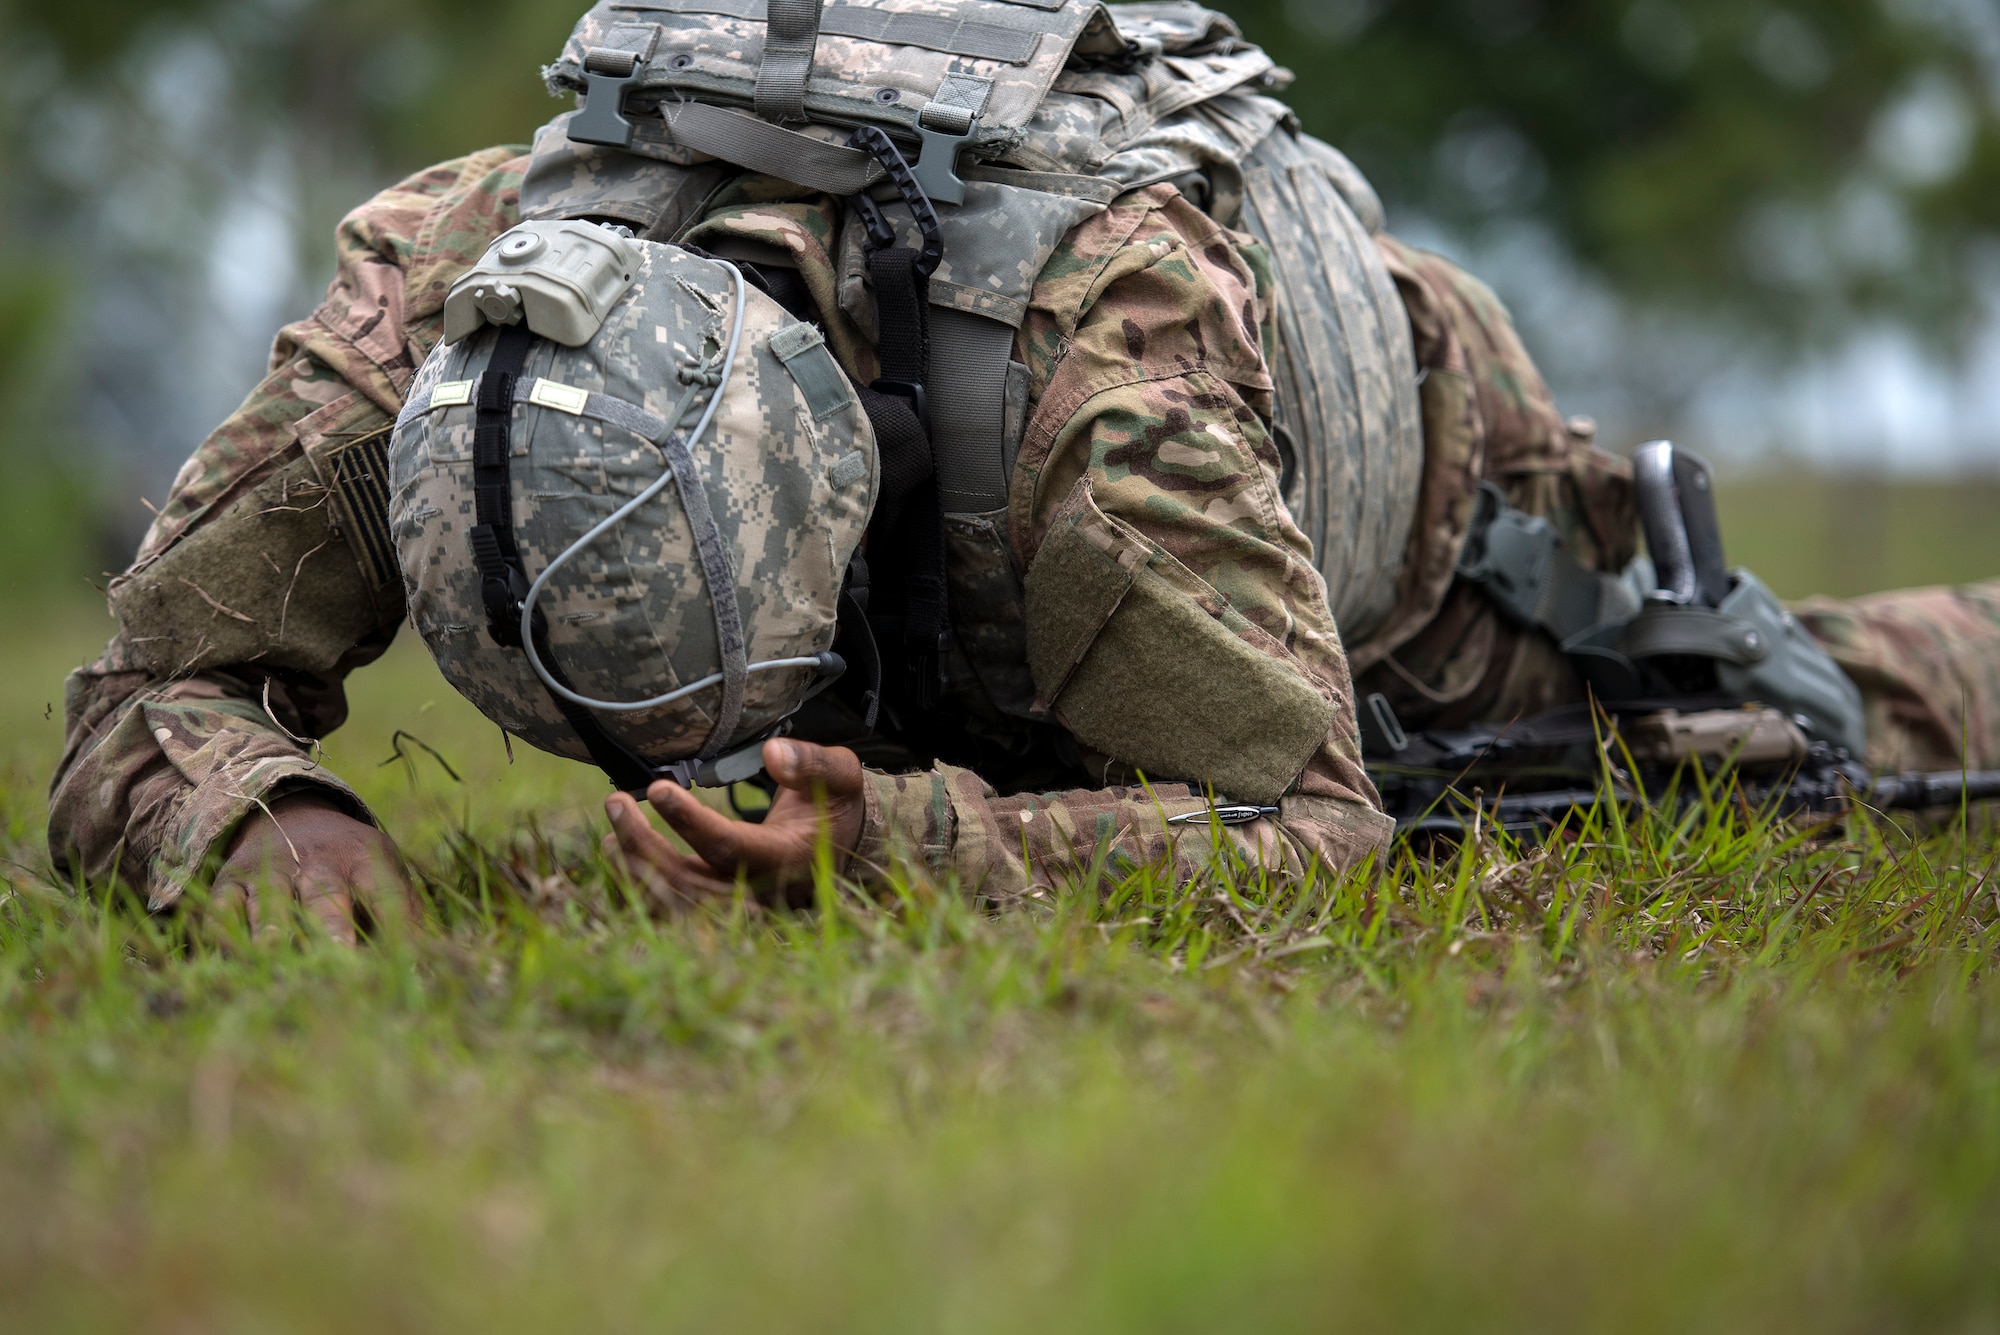 U.S. Air Force Senior Airman Eric Purnell, 823d Base Defense Squadron fireteam member, low crawls during an obstacle course, April 13, 2016, at Avon Park Air Force Range, Fla. Spartan Warrior week allowed Airmen assigned to various squadrons across the U.S. to split into teams of four and compete in generalized and career based challenges. (U.S. Air Force photo by Airman 1st Class Janiqua P. Robinson/Released)